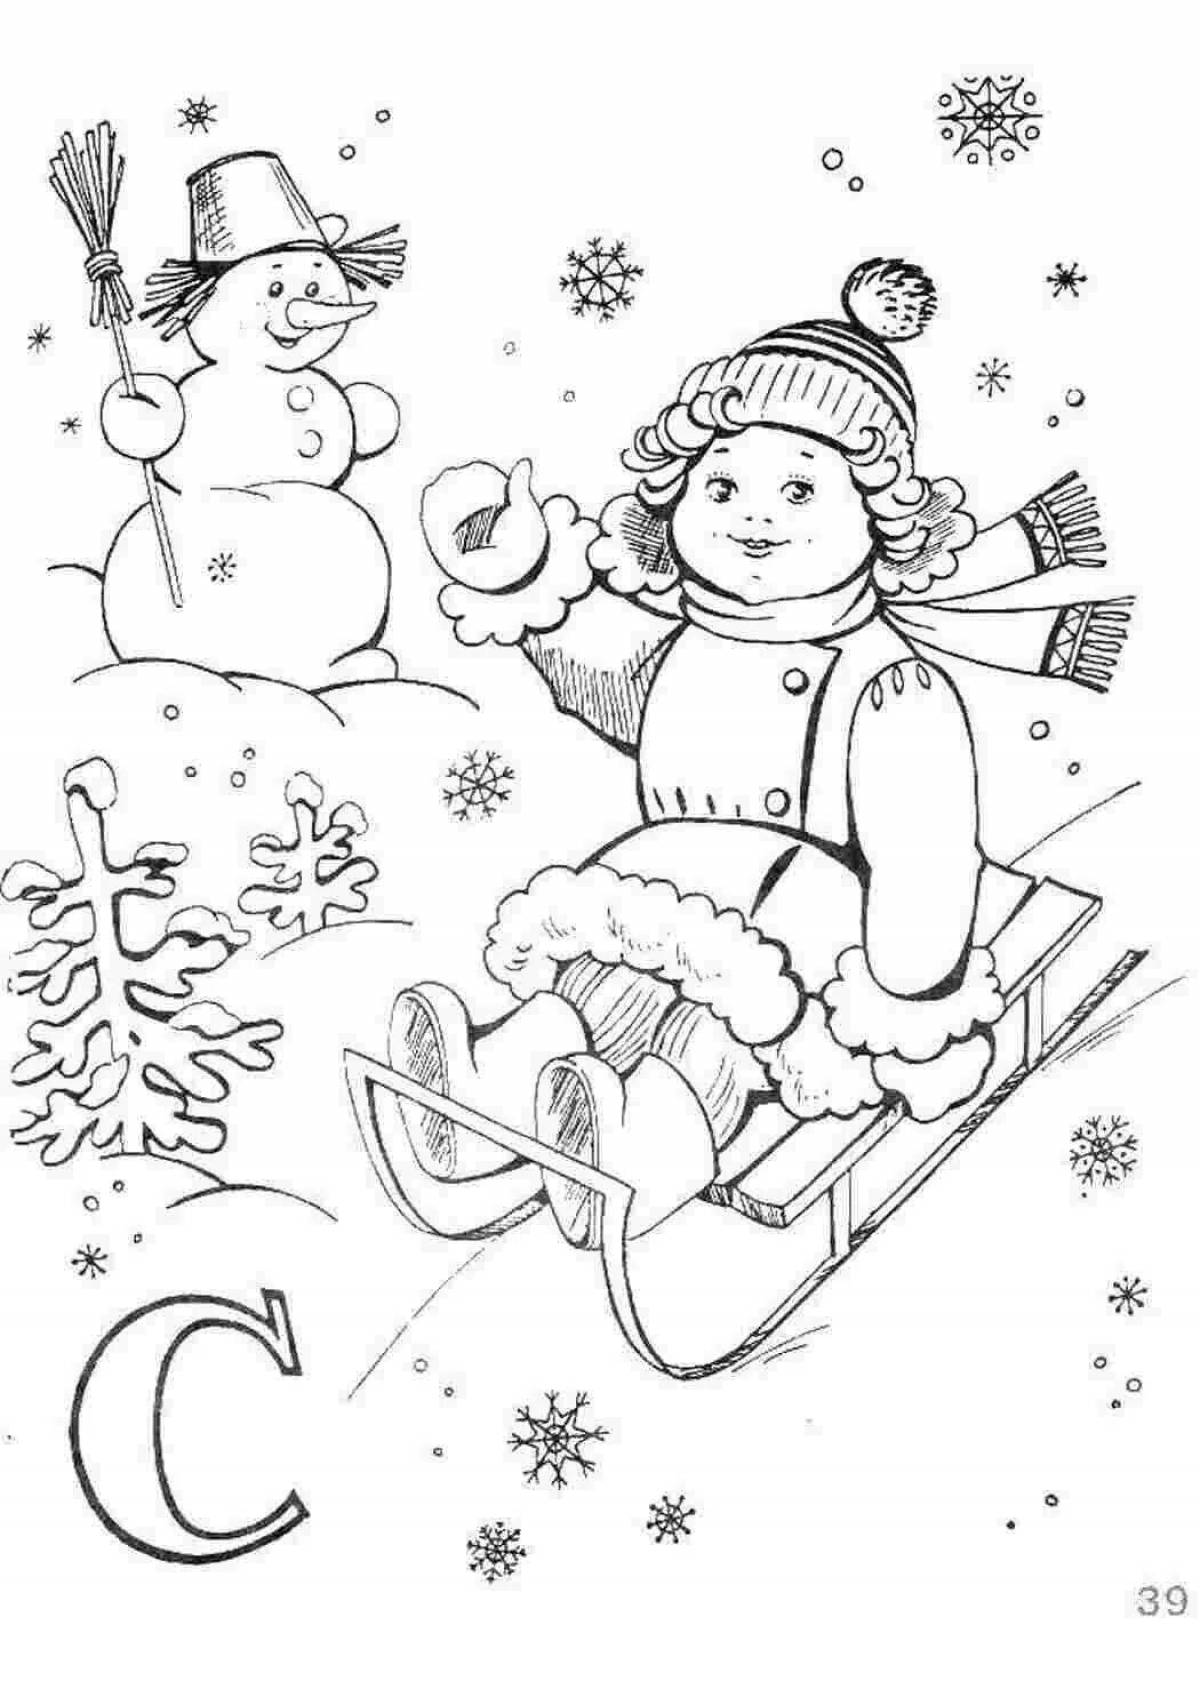 A fascinating winter coloring book for children 6-7 years old